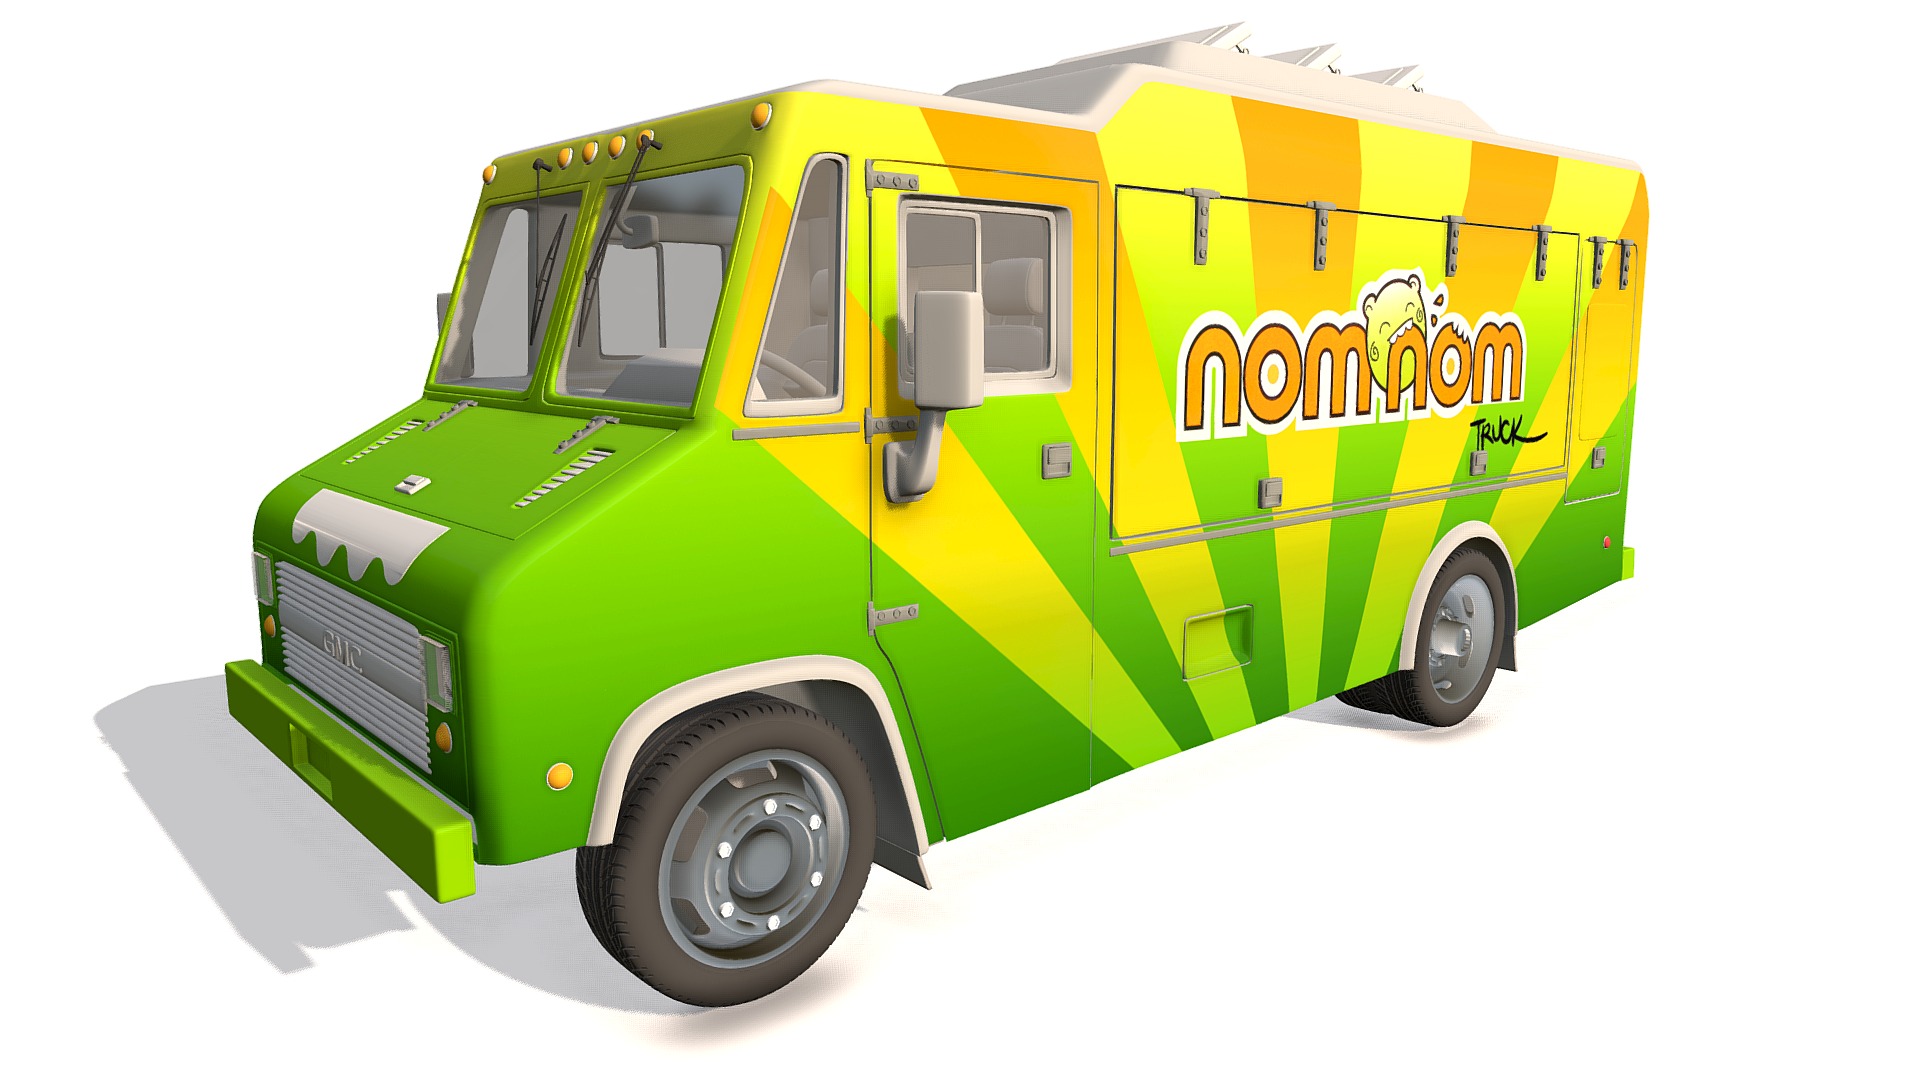 3D model Food Truck Nom Nom - This is a 3D model of the Food Truck Nom Nom. The 3D model is about a green and yellow truck.